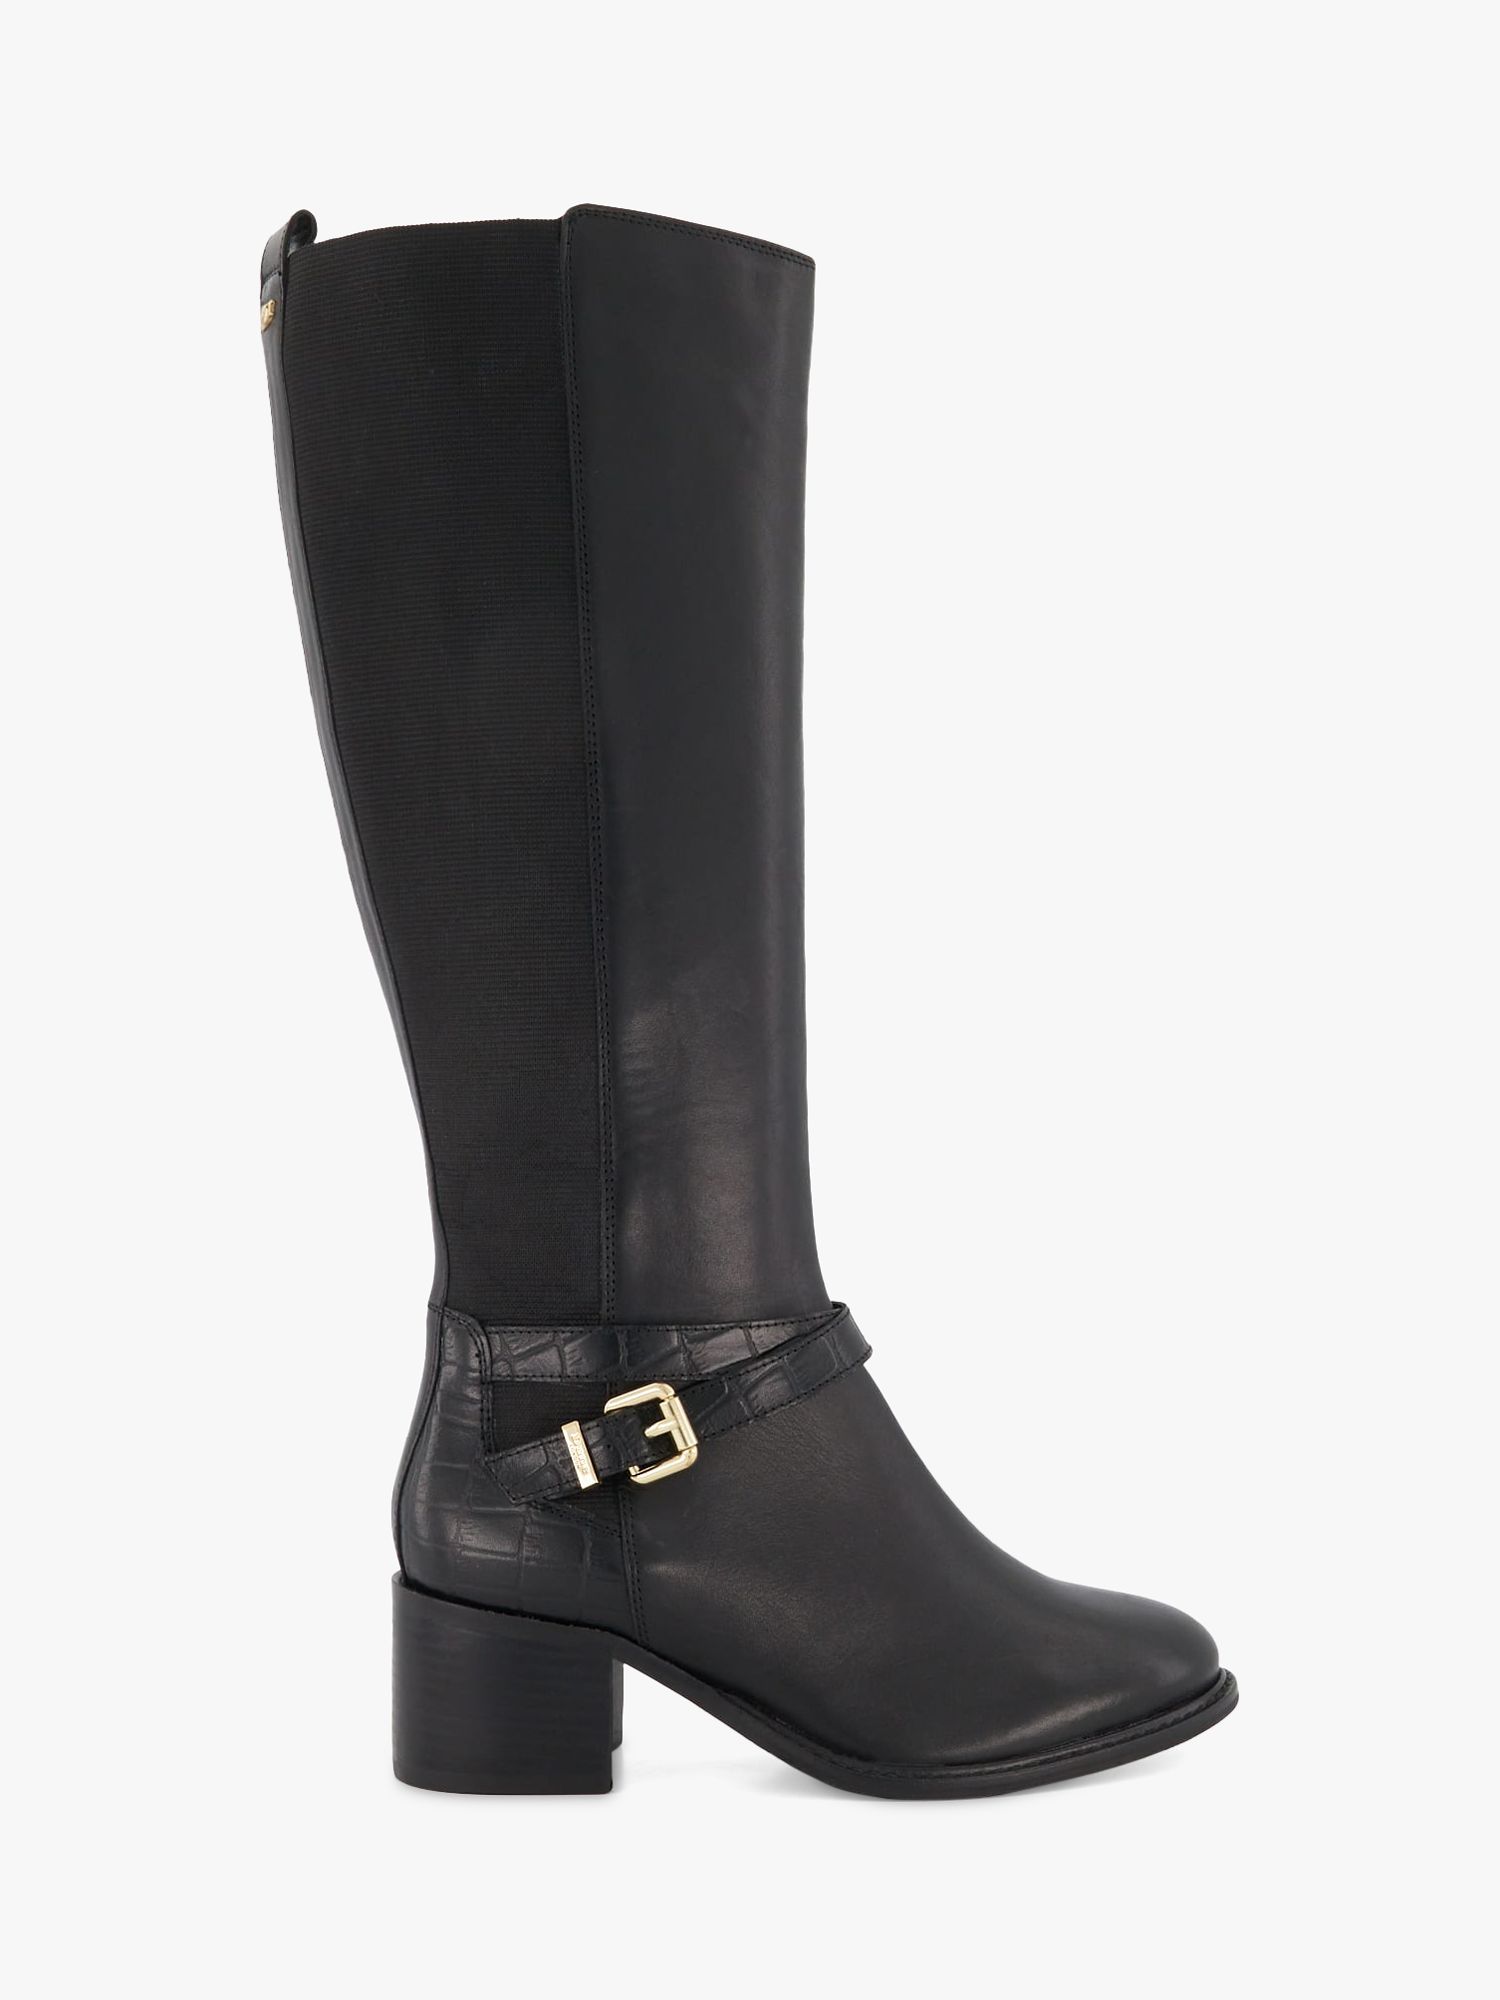 Dune Tildy Knee High Leather Boots, Black at John Lewis & Partners